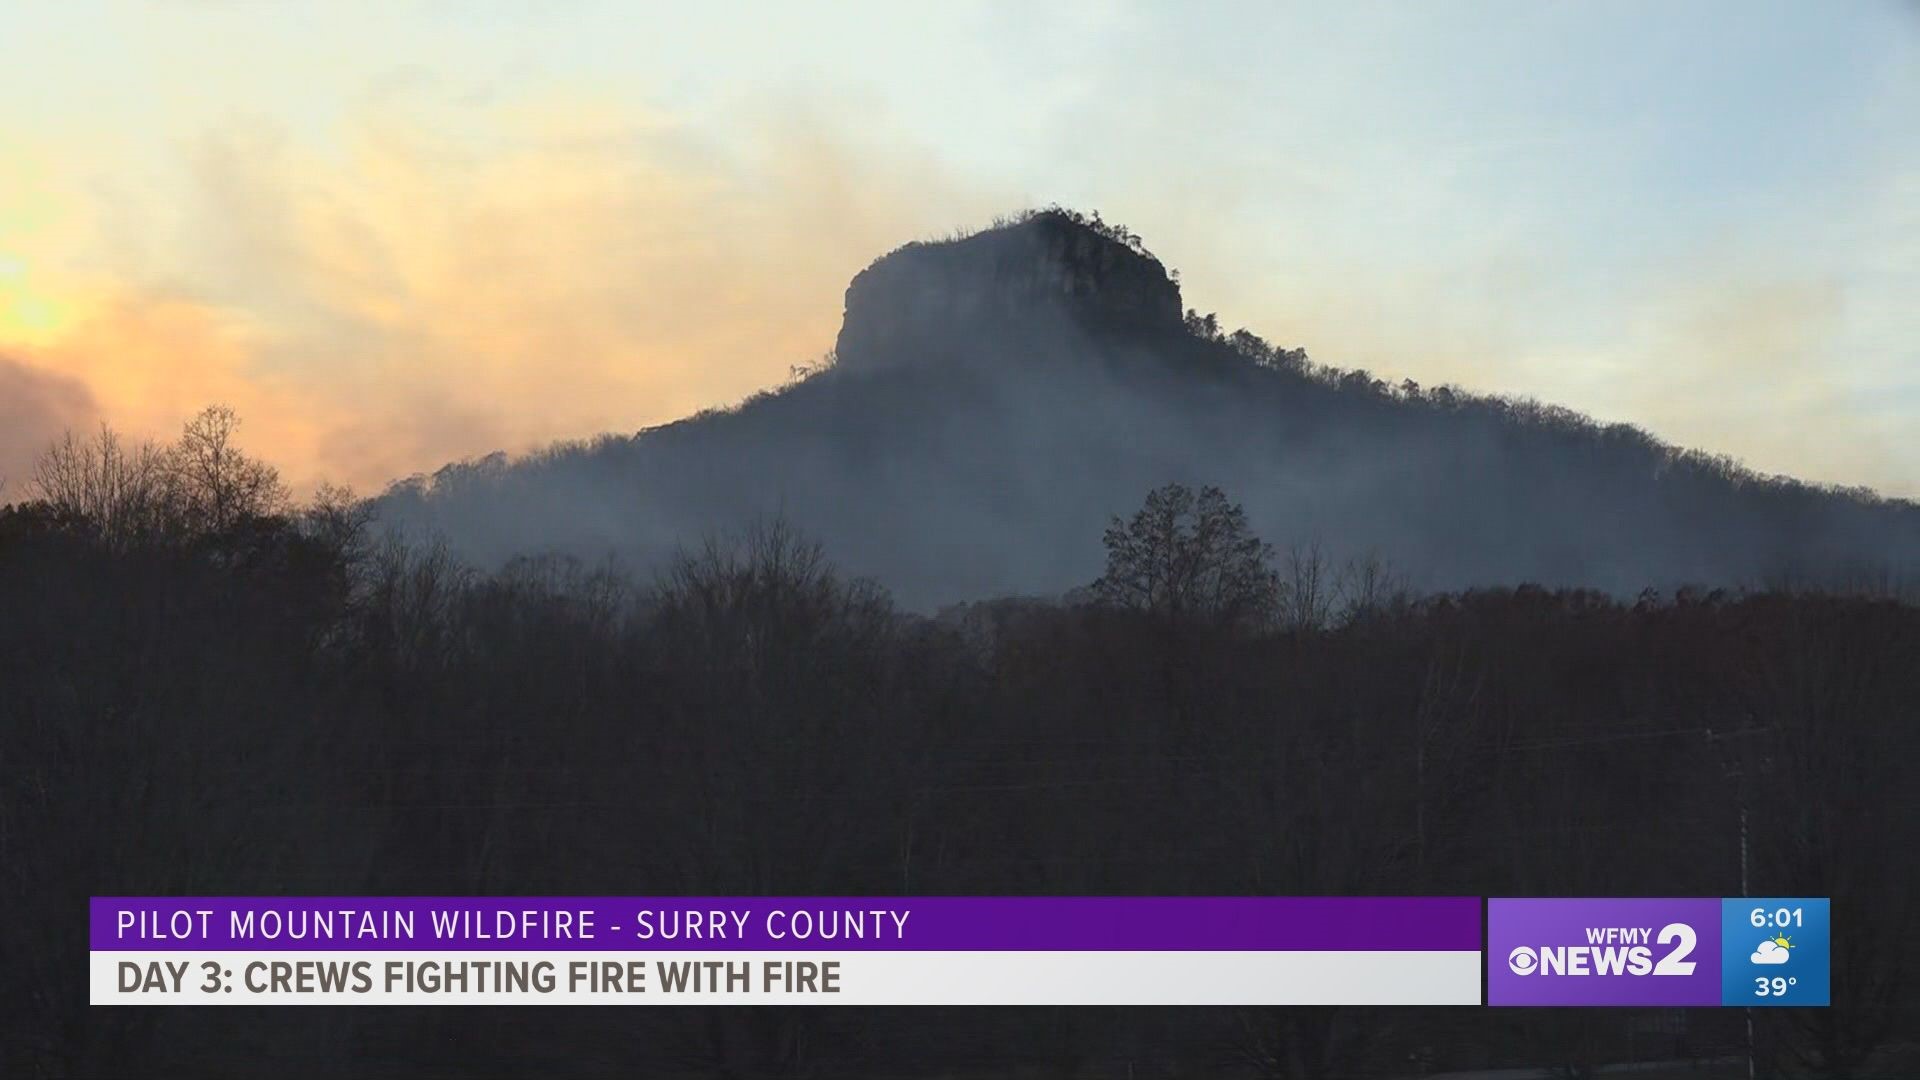 The wildfire on Pilot Mountain continues to grow doubling in size overnight and threatening wildlife.